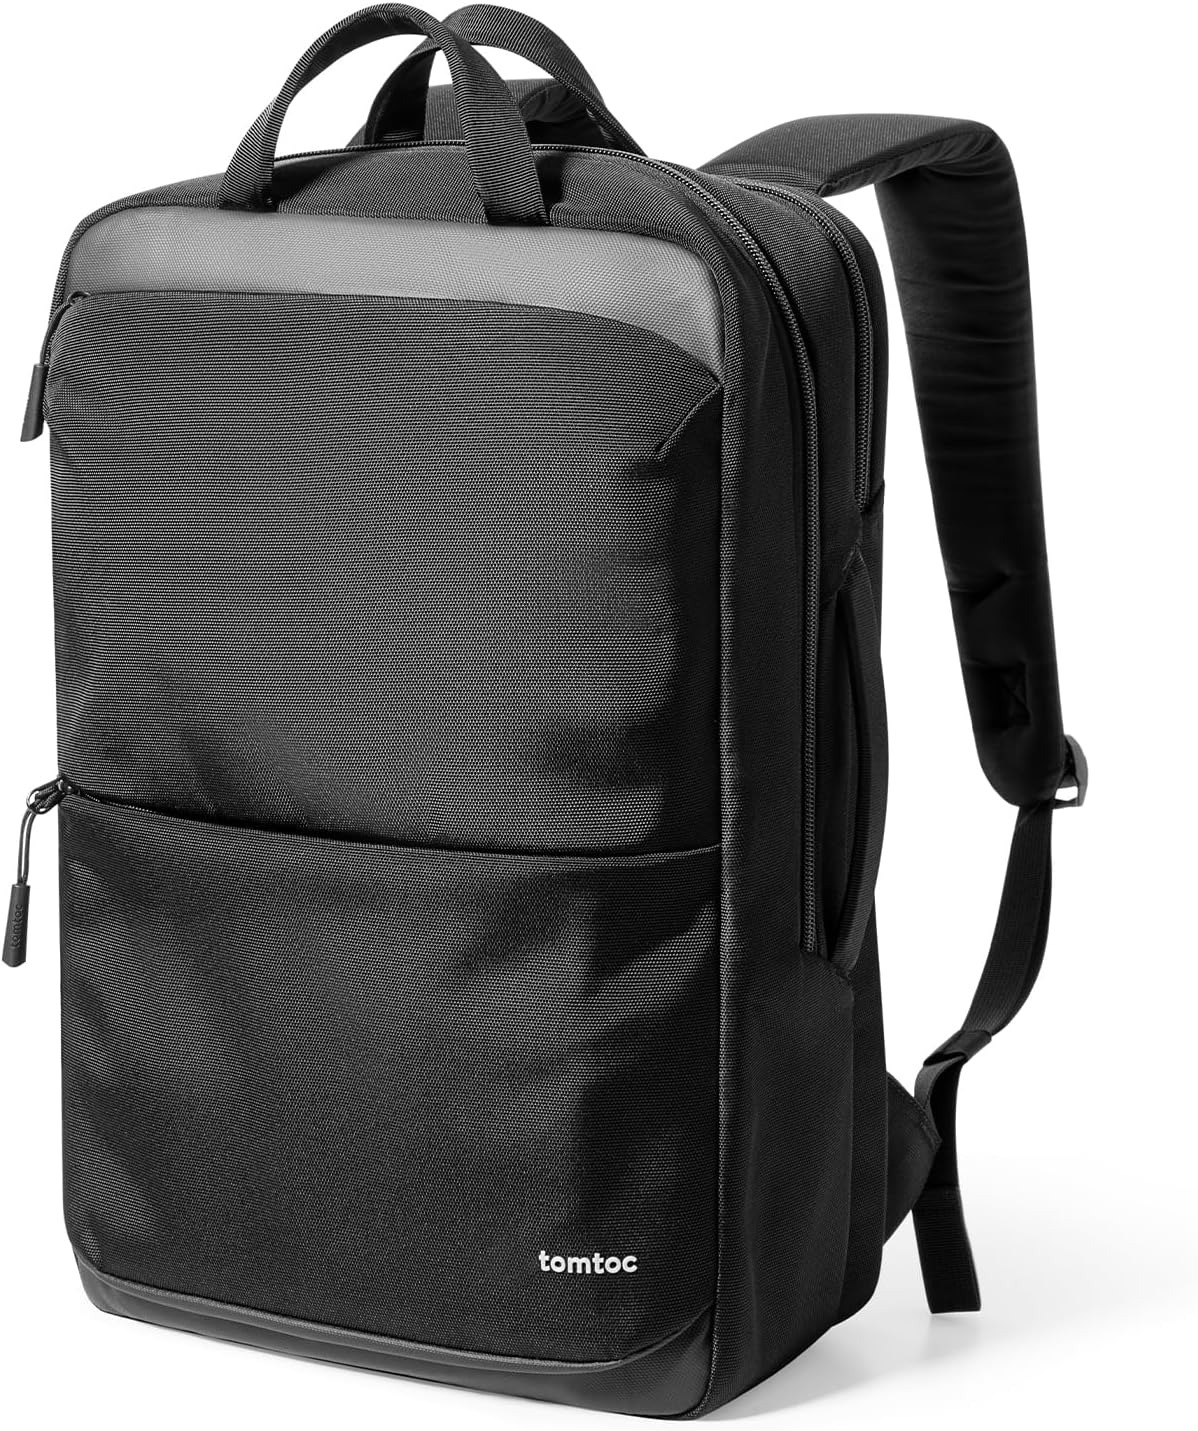 Tomtoc 17.3-inch Protective Laptop Backpack for Business Office, Travel Commuter